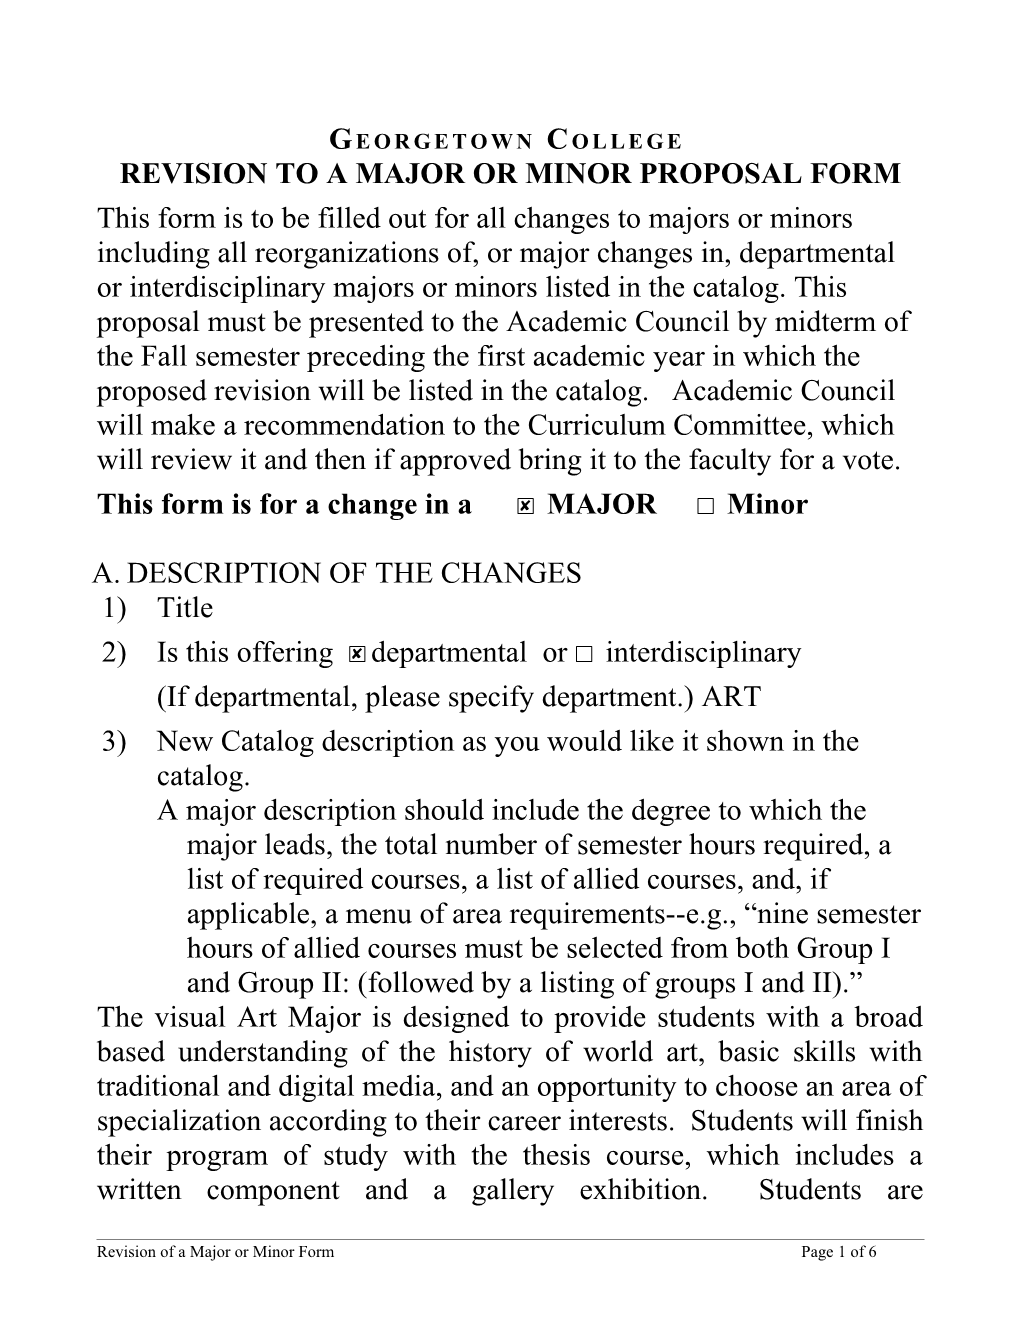 Revision to a Major Or Minor Proposal Form